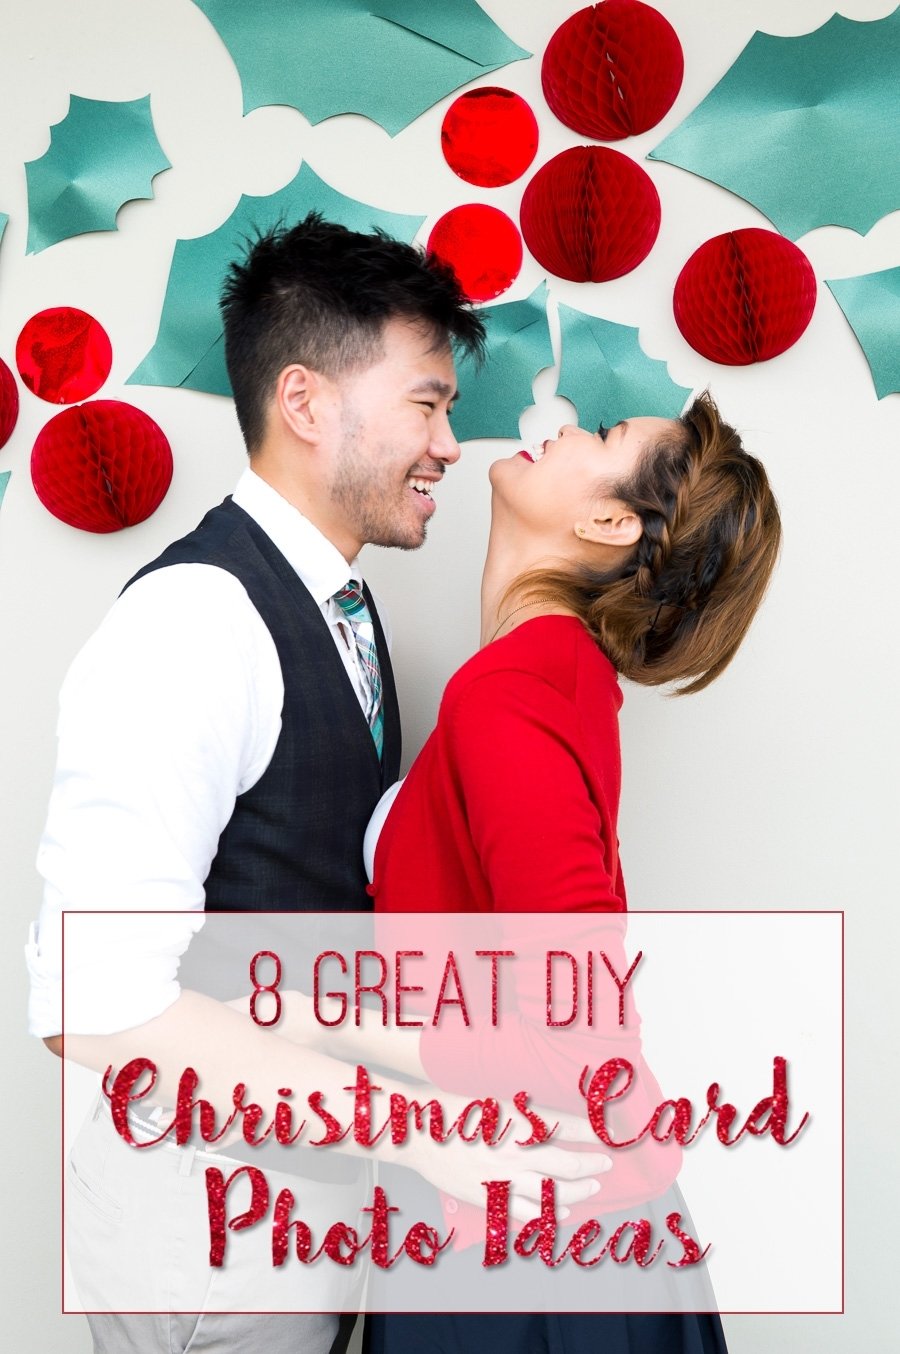 10 Spectacular Christmas Card Photo Ideas For Couples the wedding scoop 1 2022